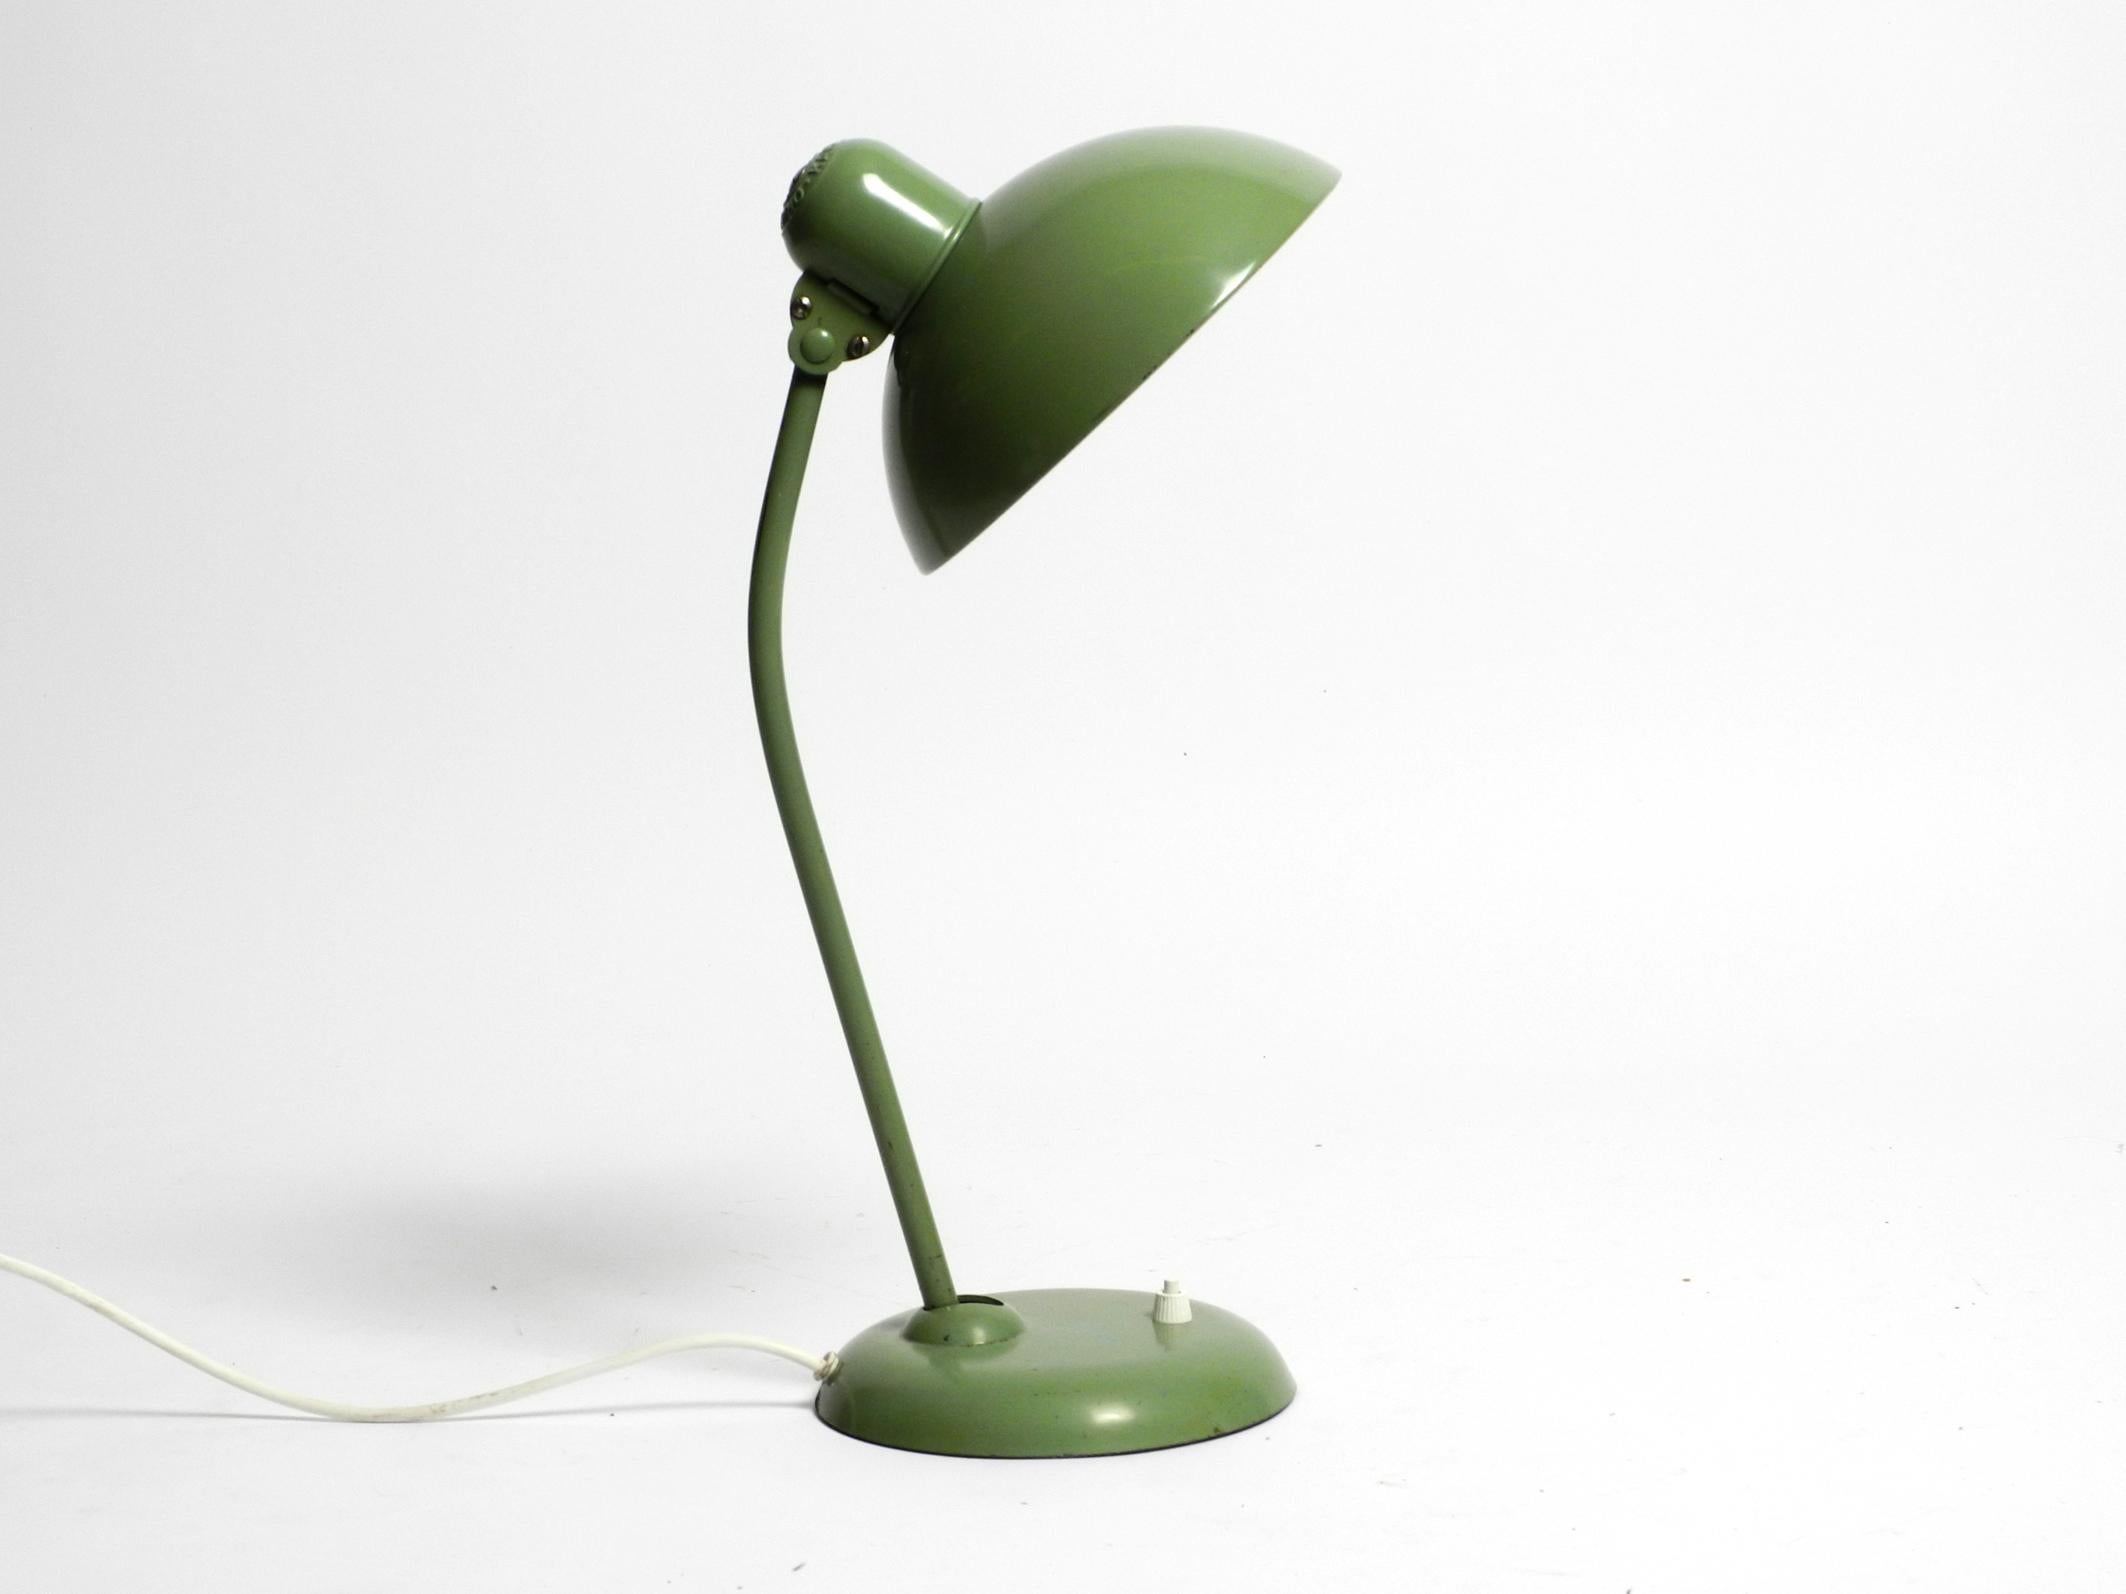 Original Mid Century Modern Kaiser Idell Industrial Metal Table Lamp.
Very rare in this color of original industrial green.
100% original condition and fully functional.
Great industrial design in very good vintage condition with a beautiful